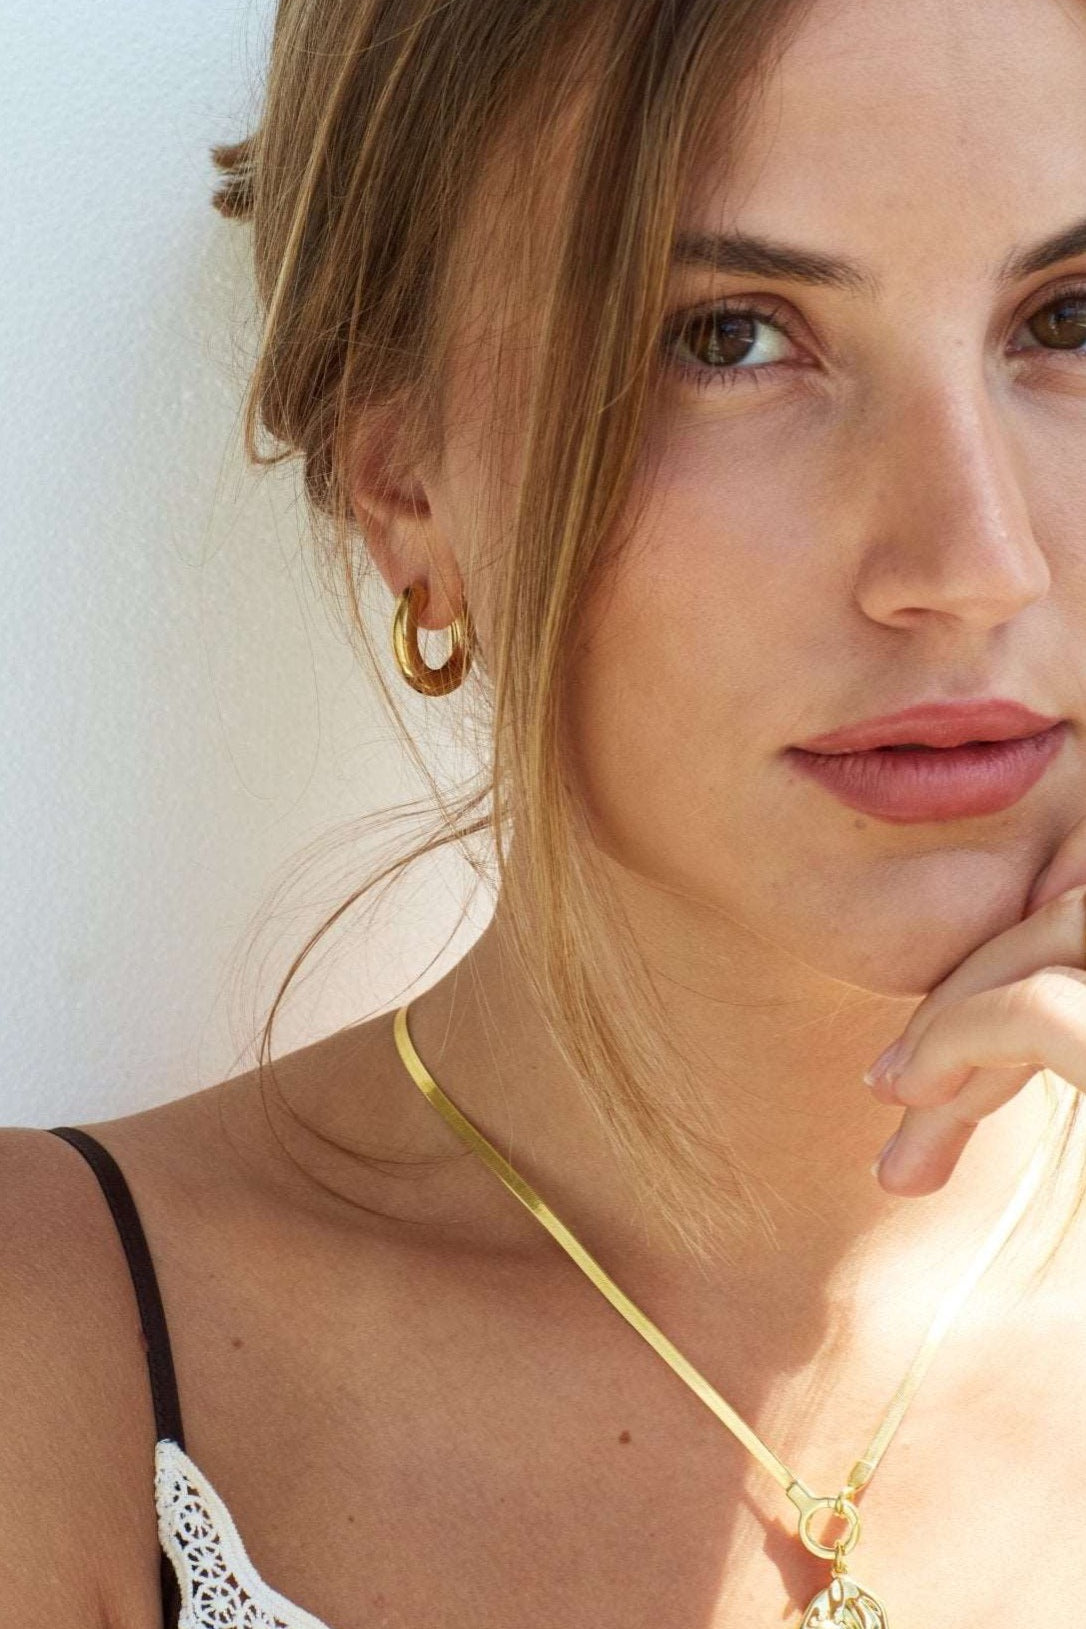 Solid everyday gold hoop earrings from Bixby and Co